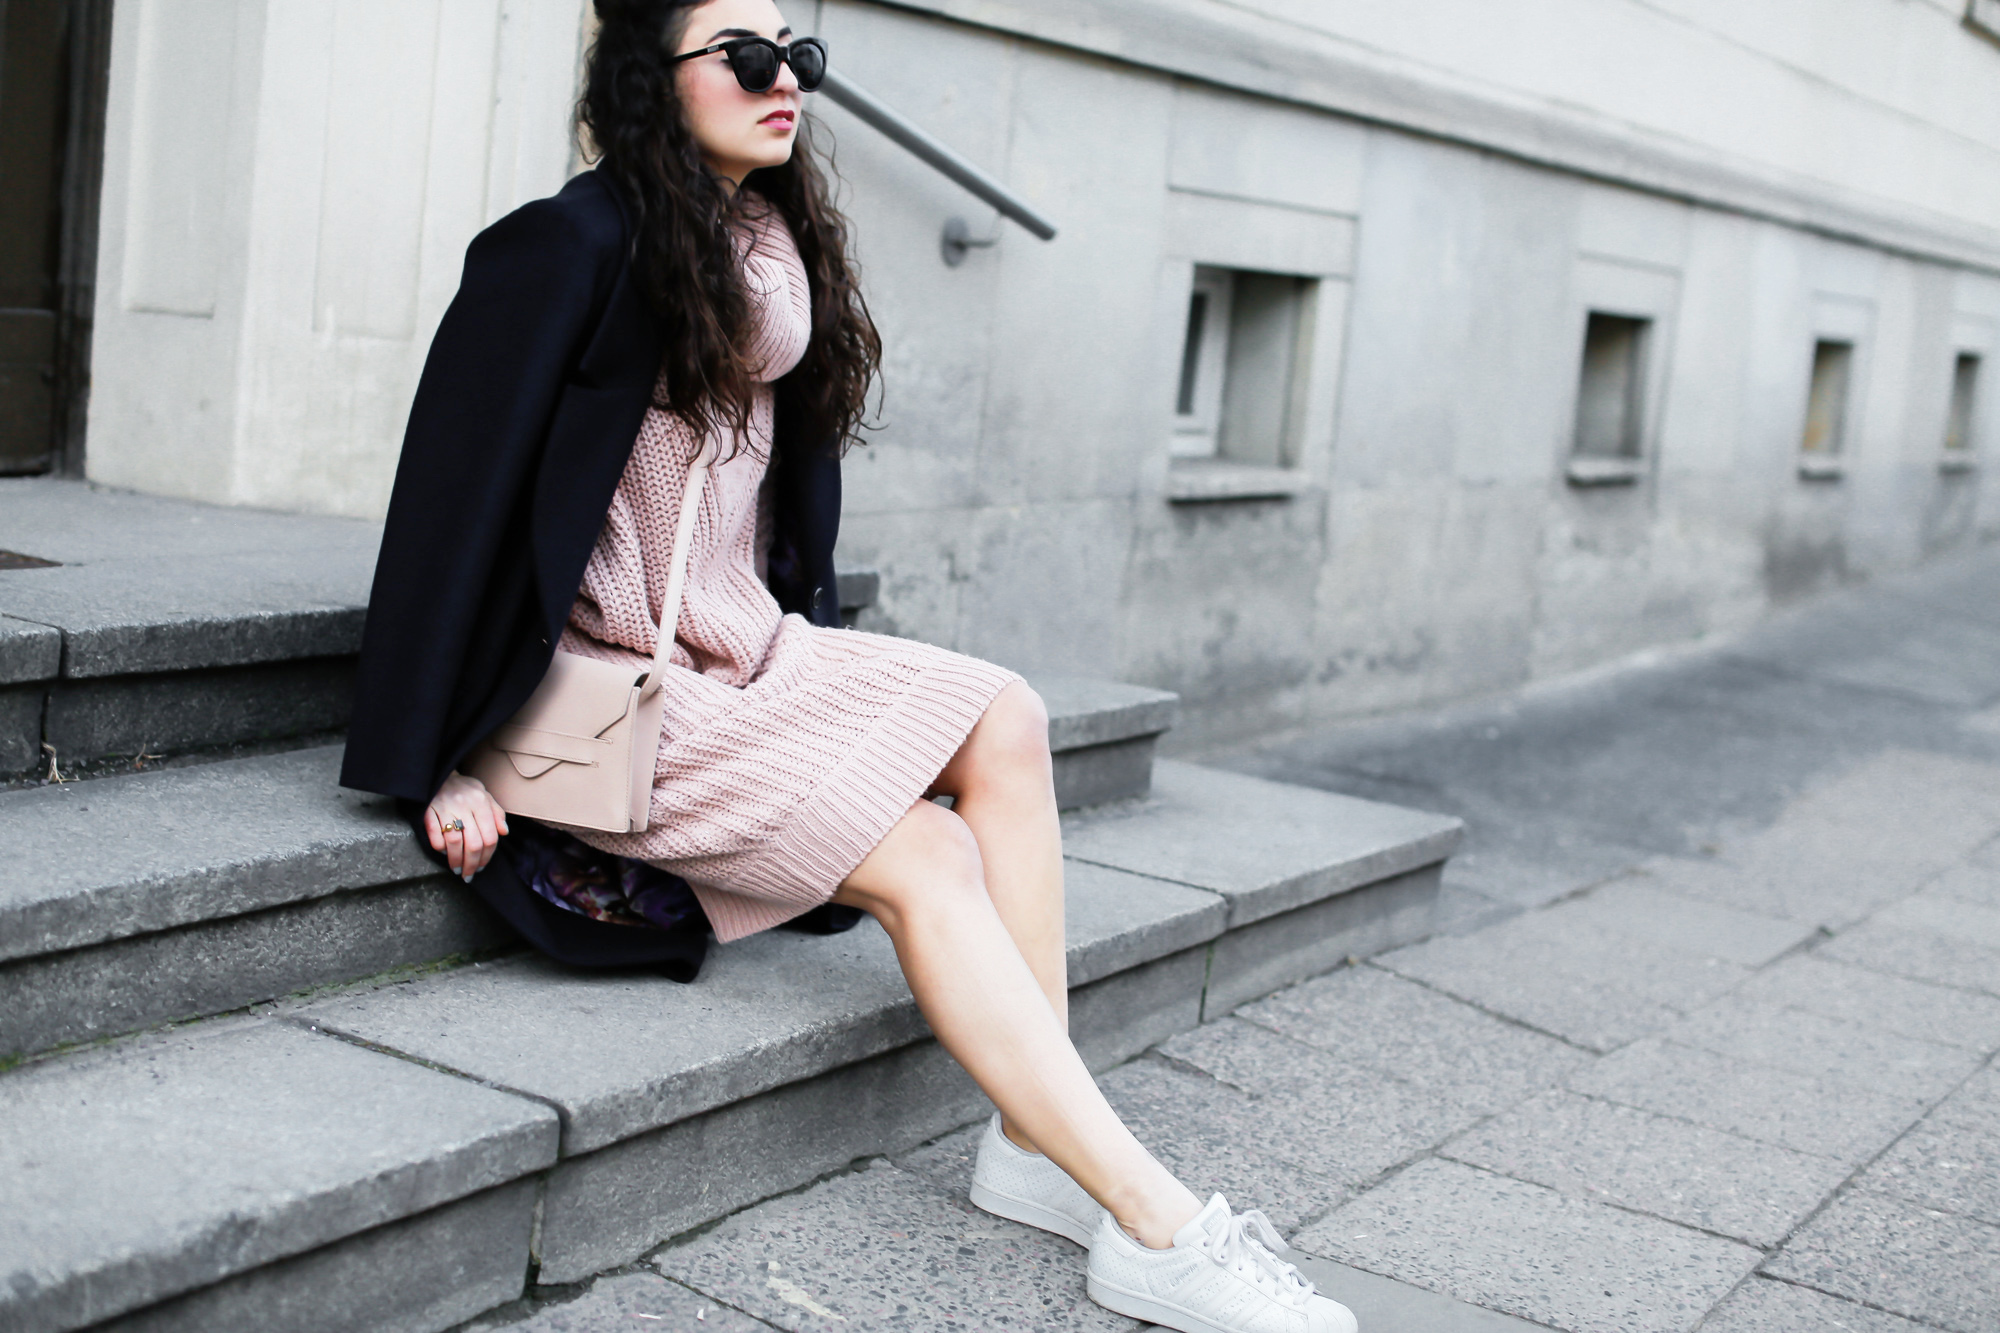 Knitted Dress And Sneakers - Fashionblog